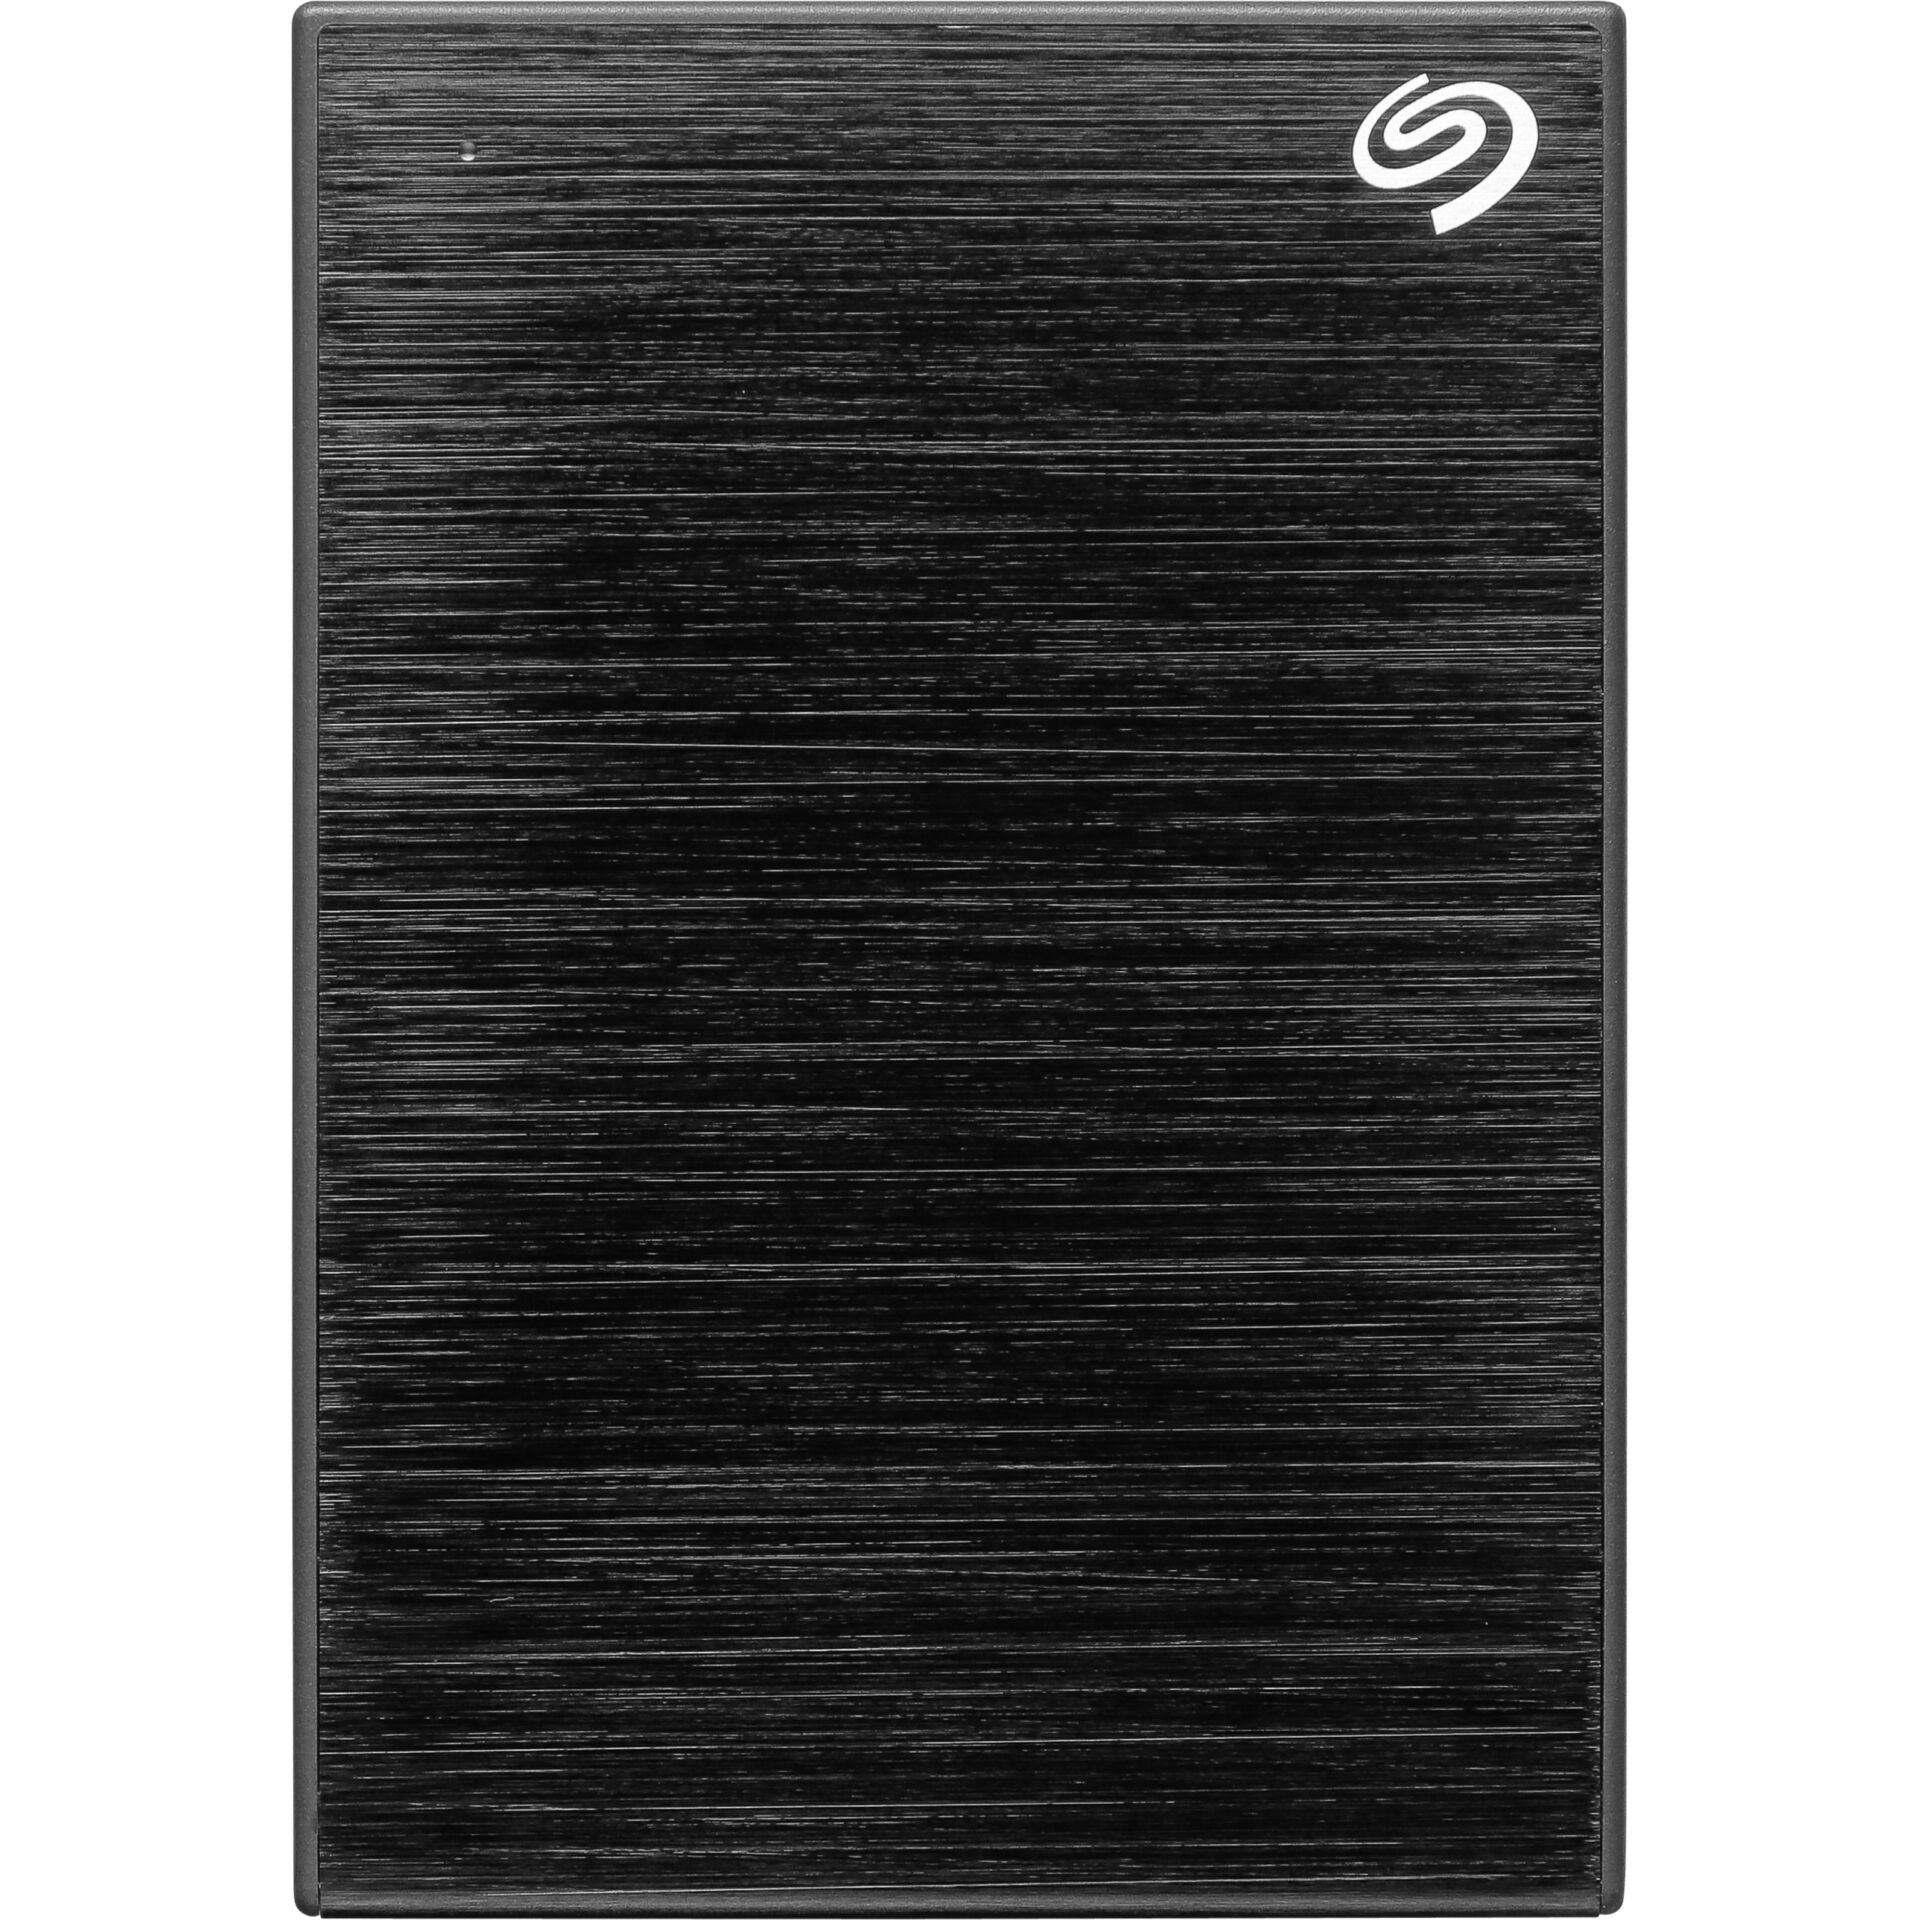 Seagate -Externe Festplatte OneTouch TB 4 -Seagate Hardware/Electronic Portable